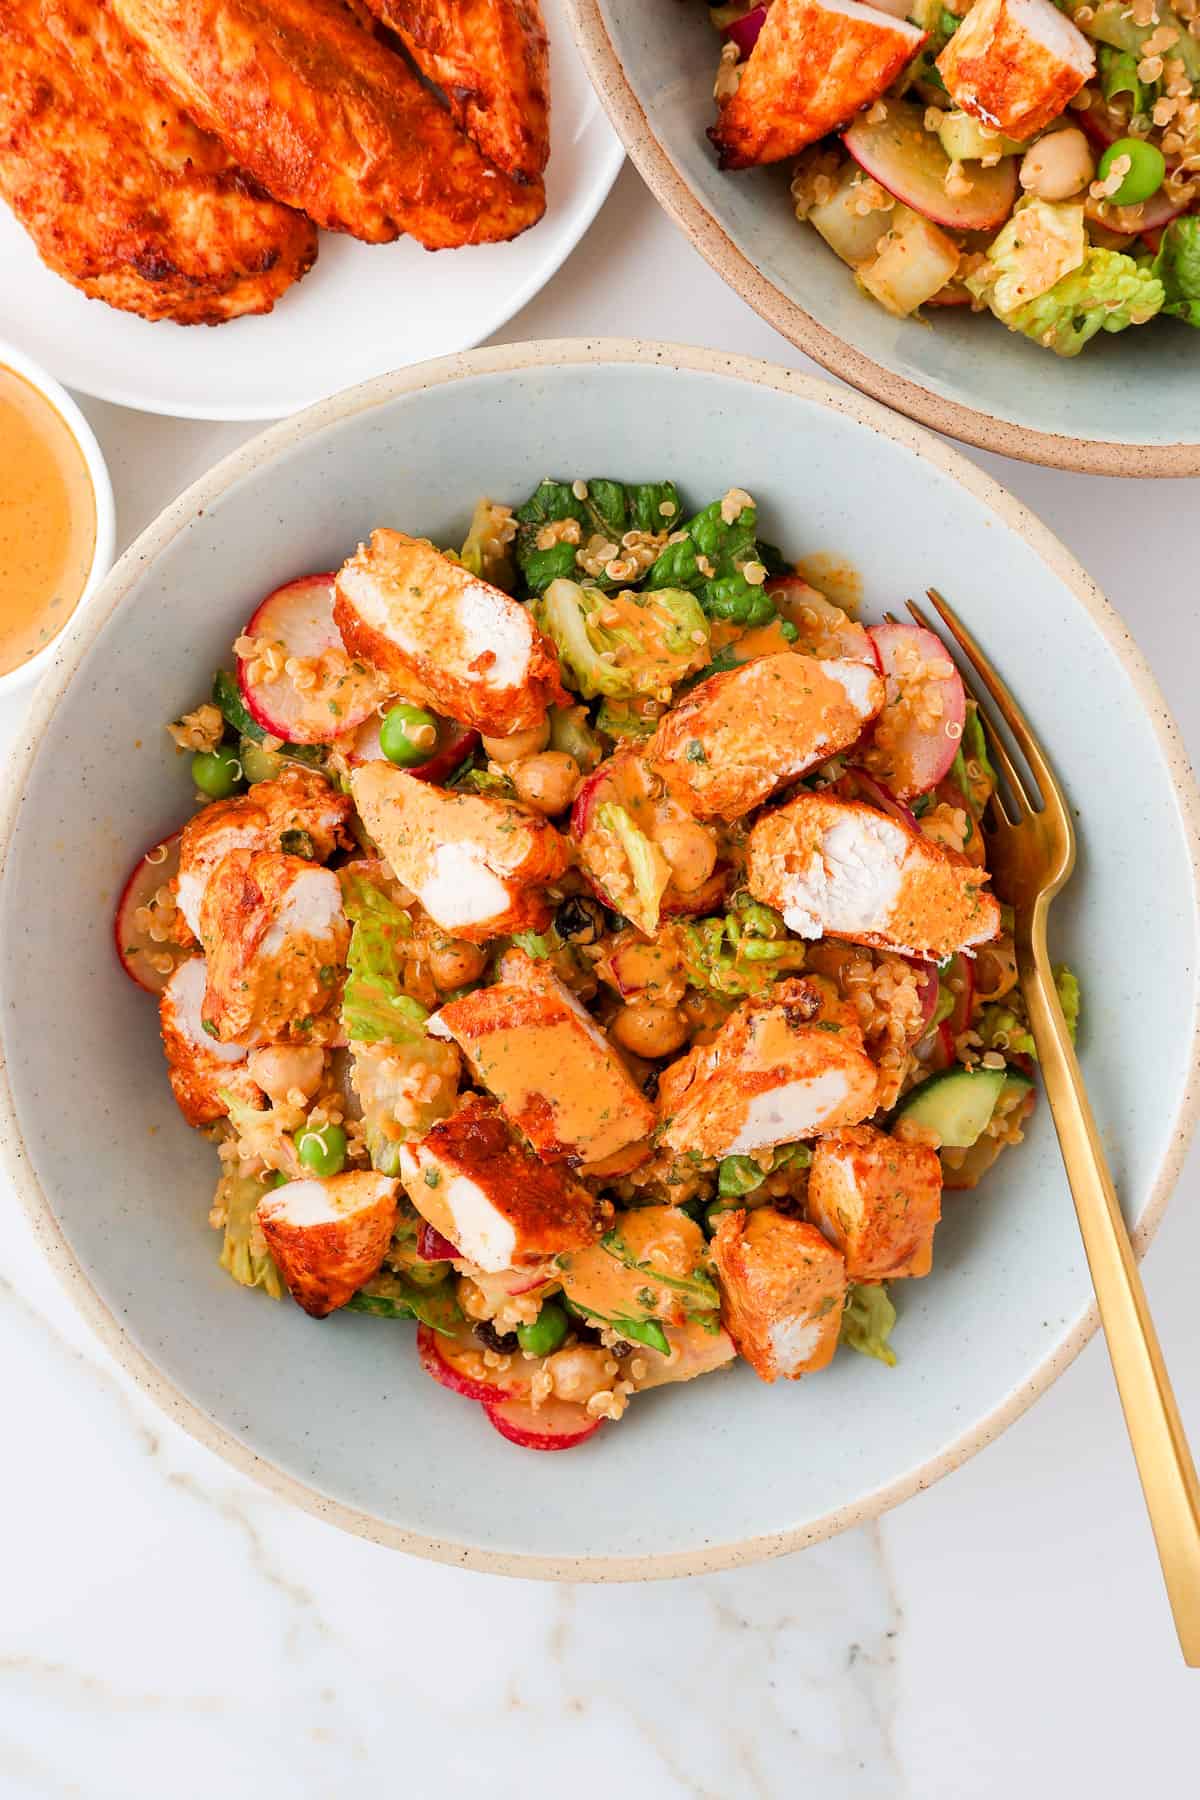 Chicken tikka salad in bowls with a fork and chicken on the side.